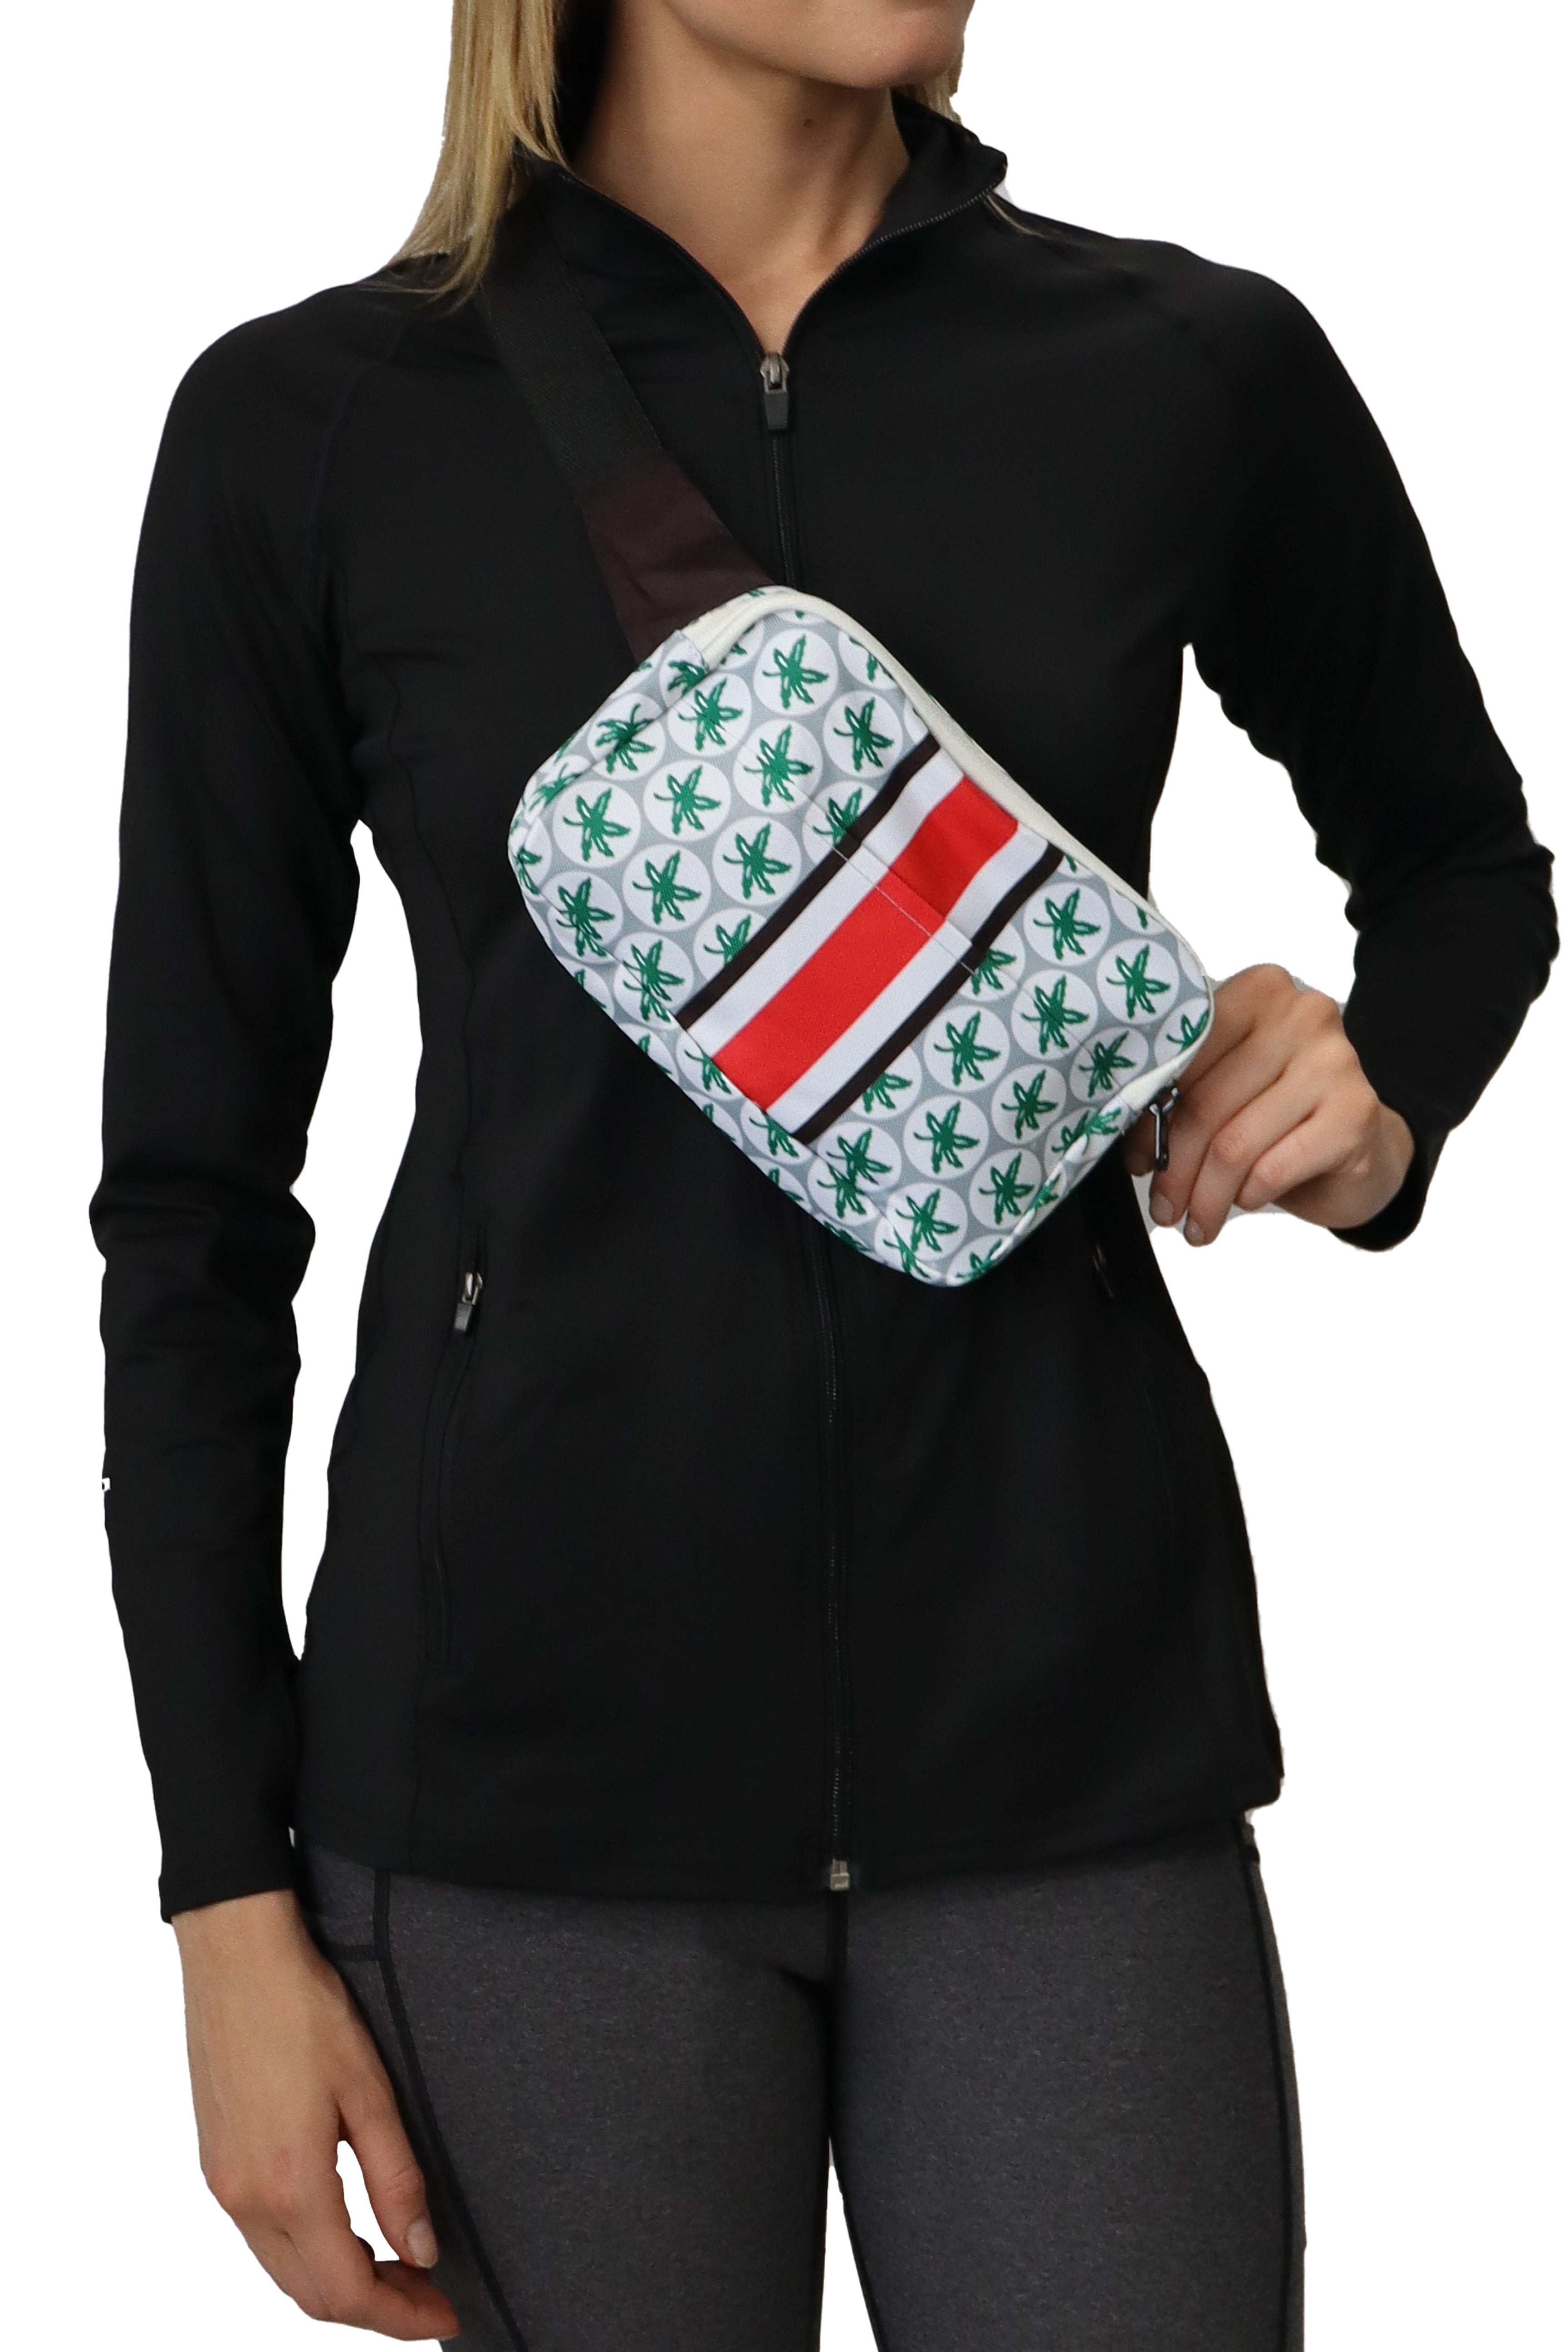 2107 -Ohio State Buckeyes "Gameday" Square Fanny Pack